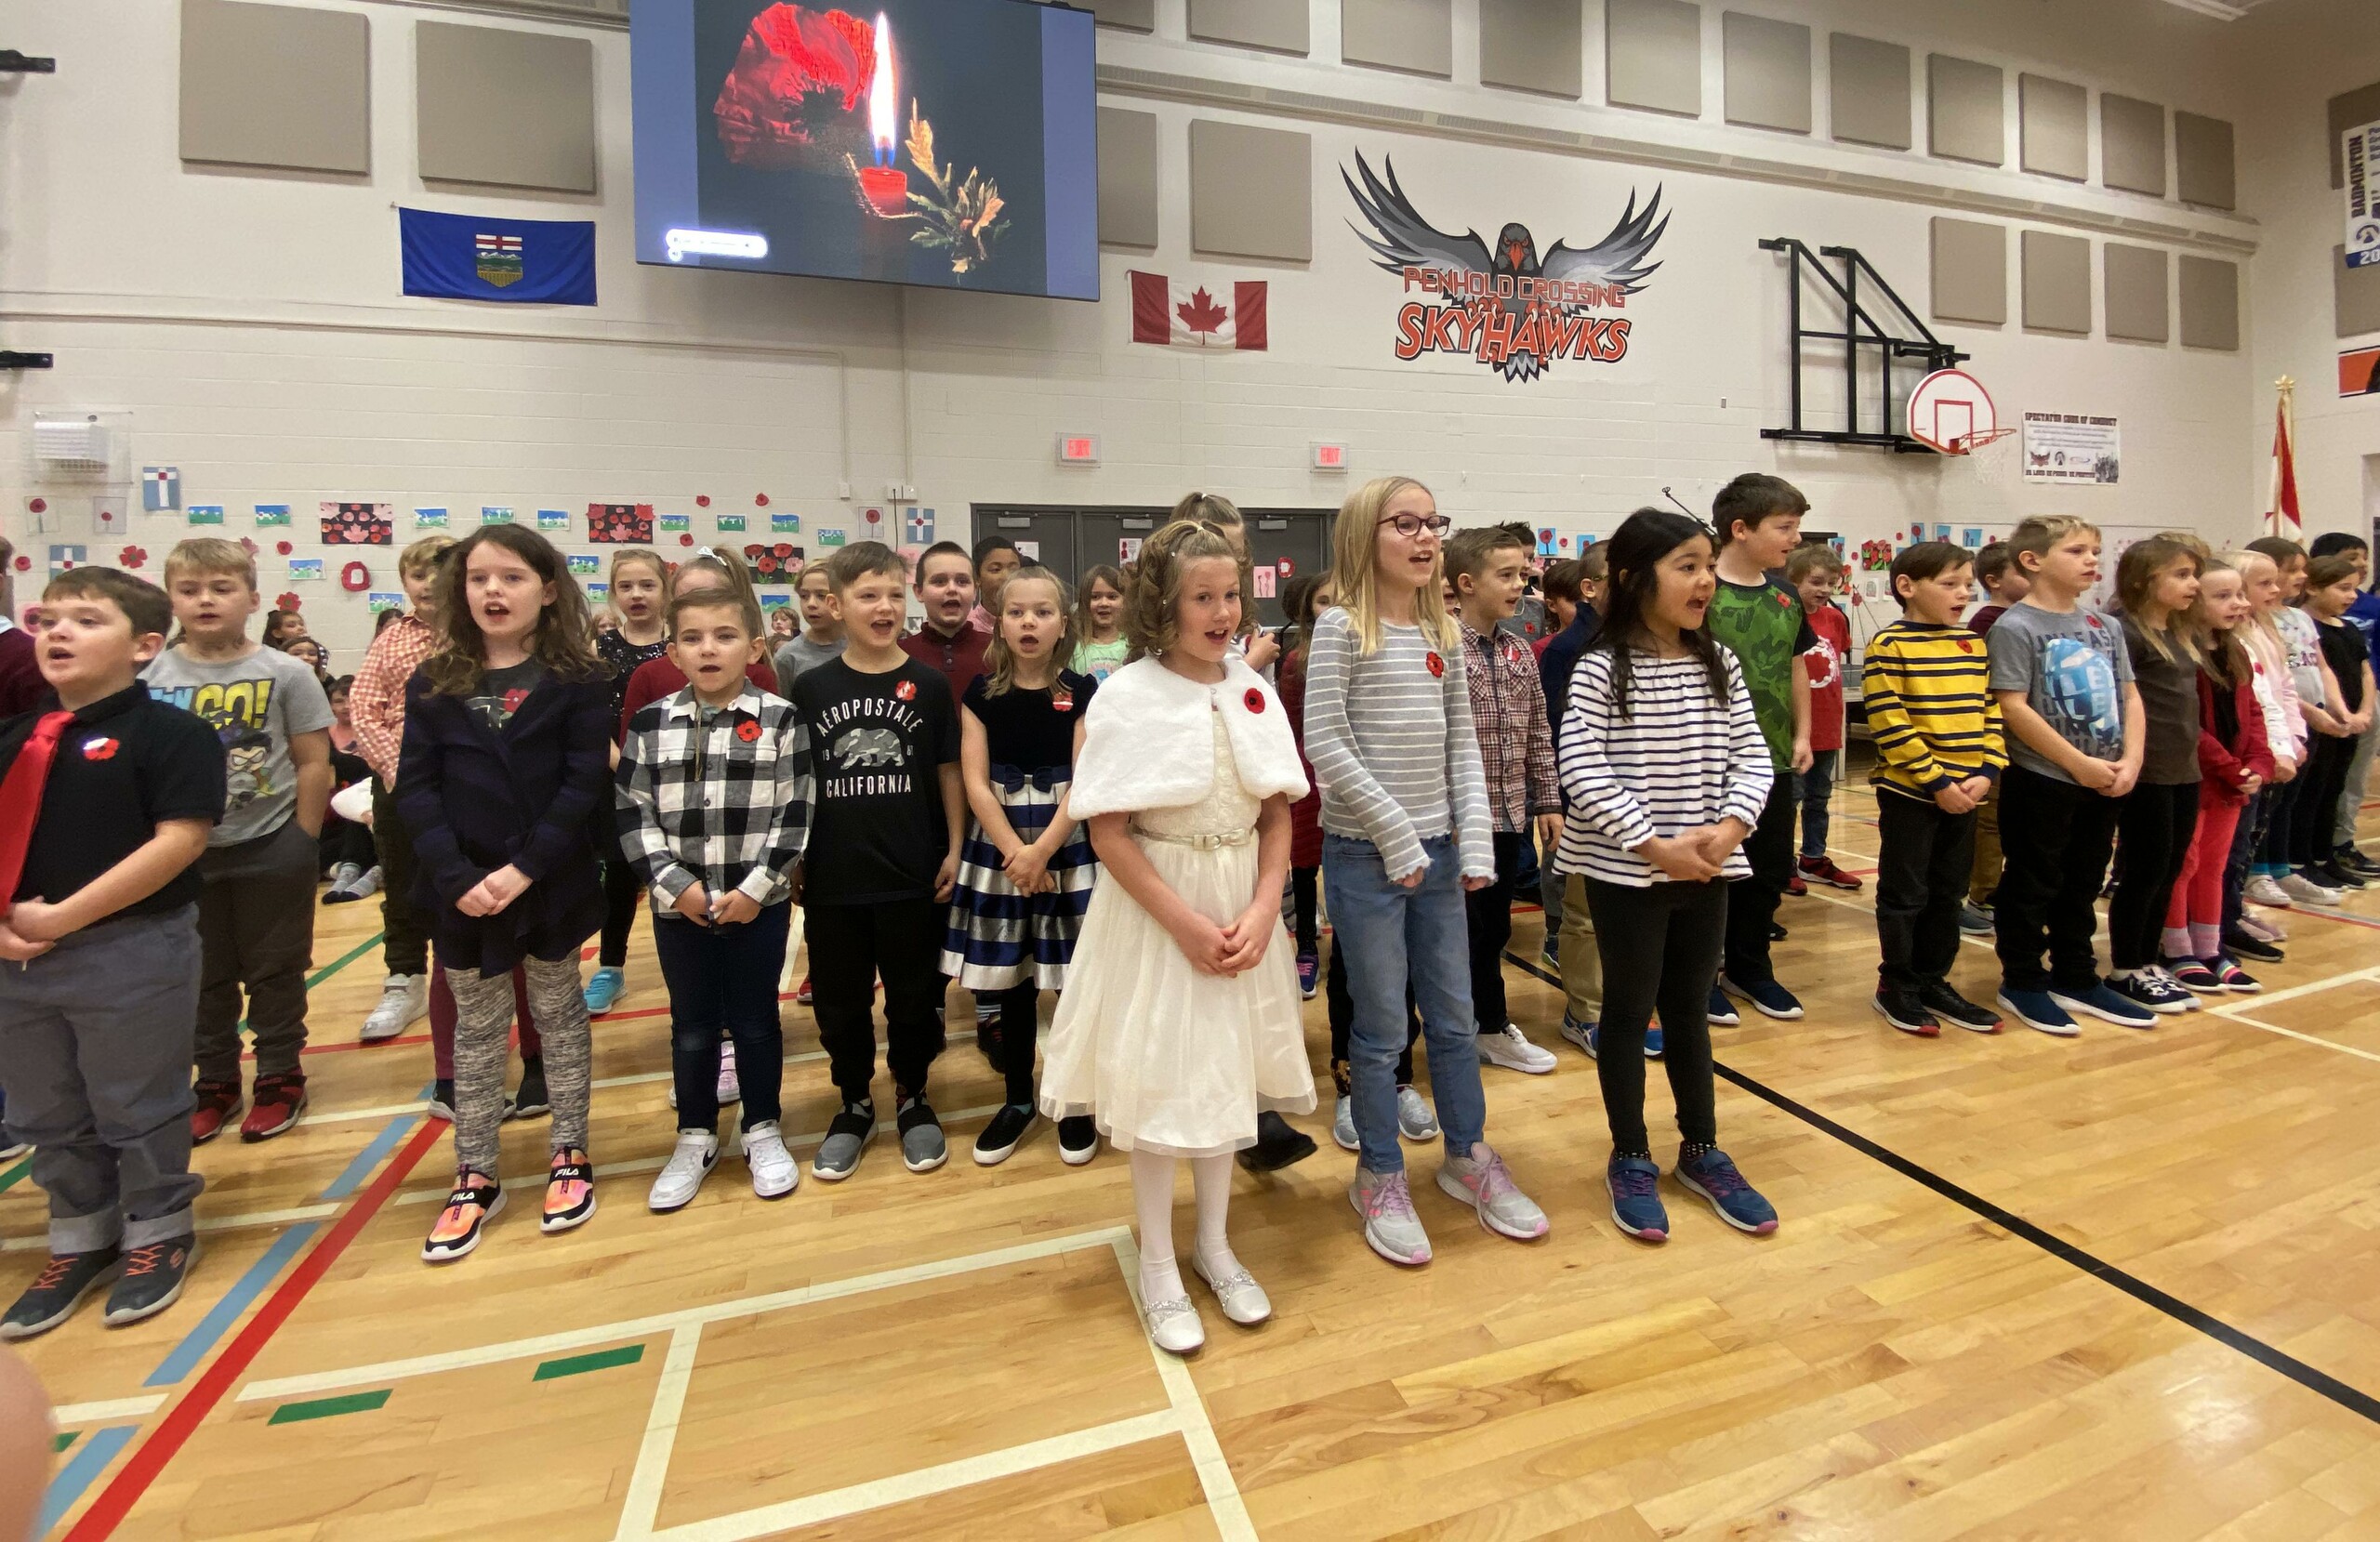 We remember Chinook's Edge School Division